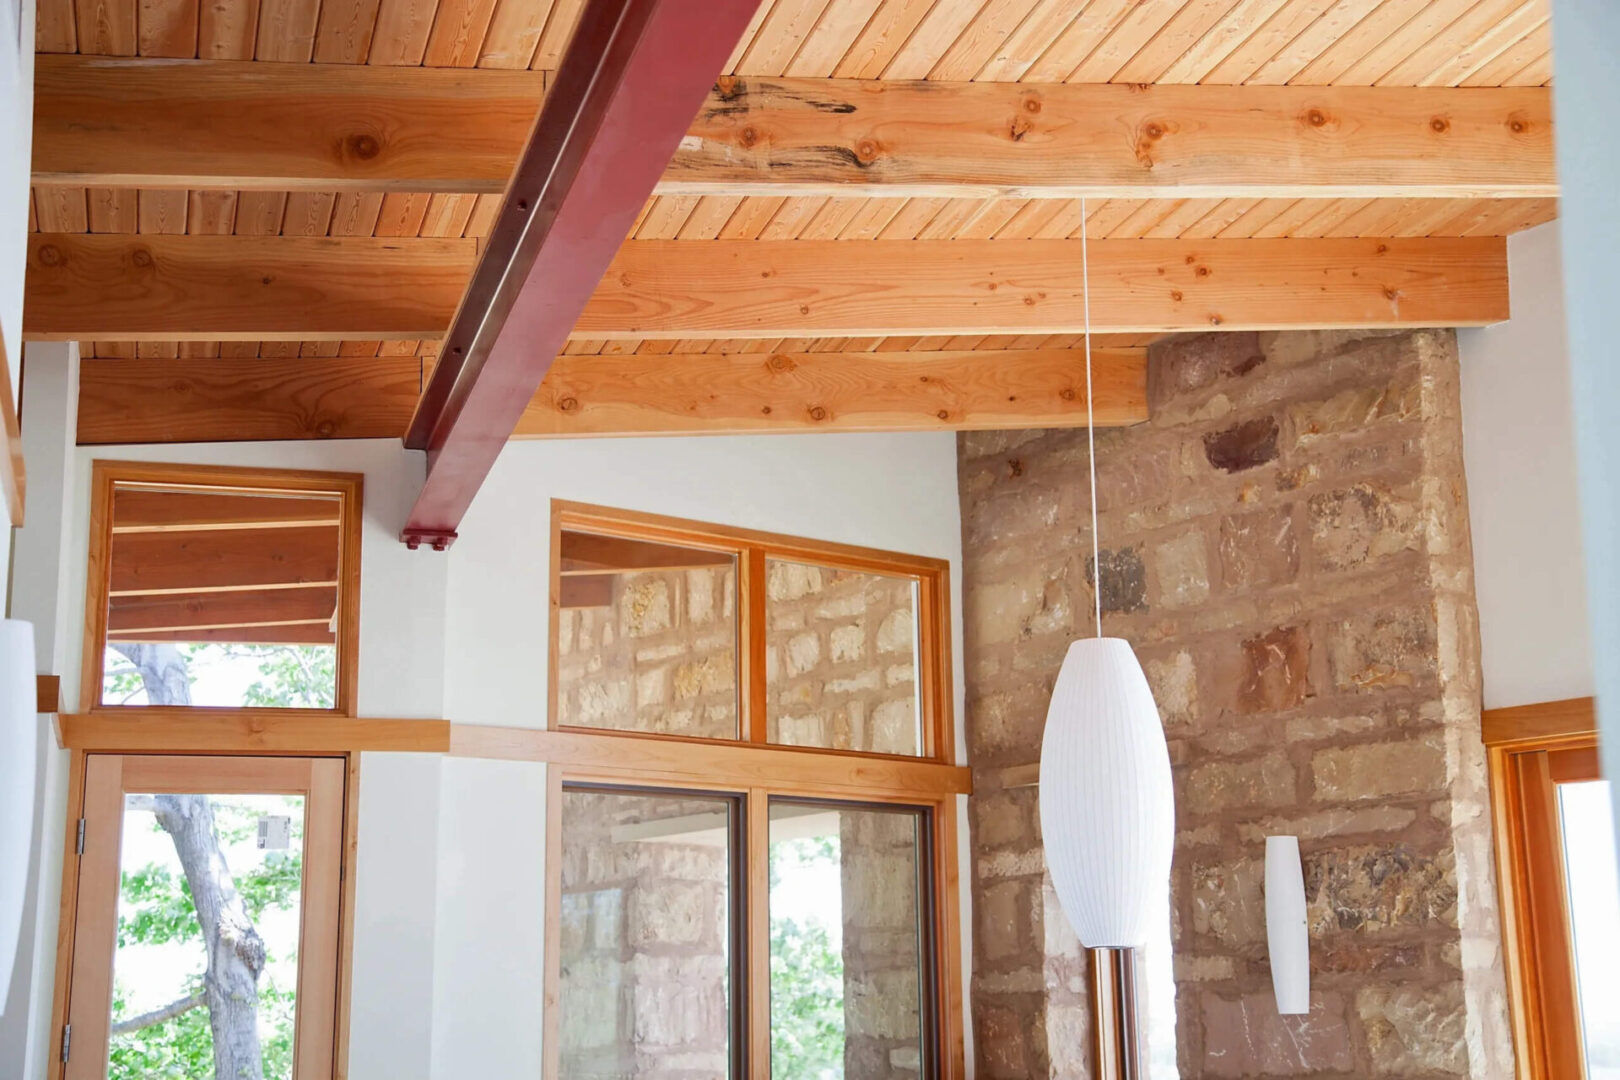 home interior with wooden ceilings and a hanging lamp